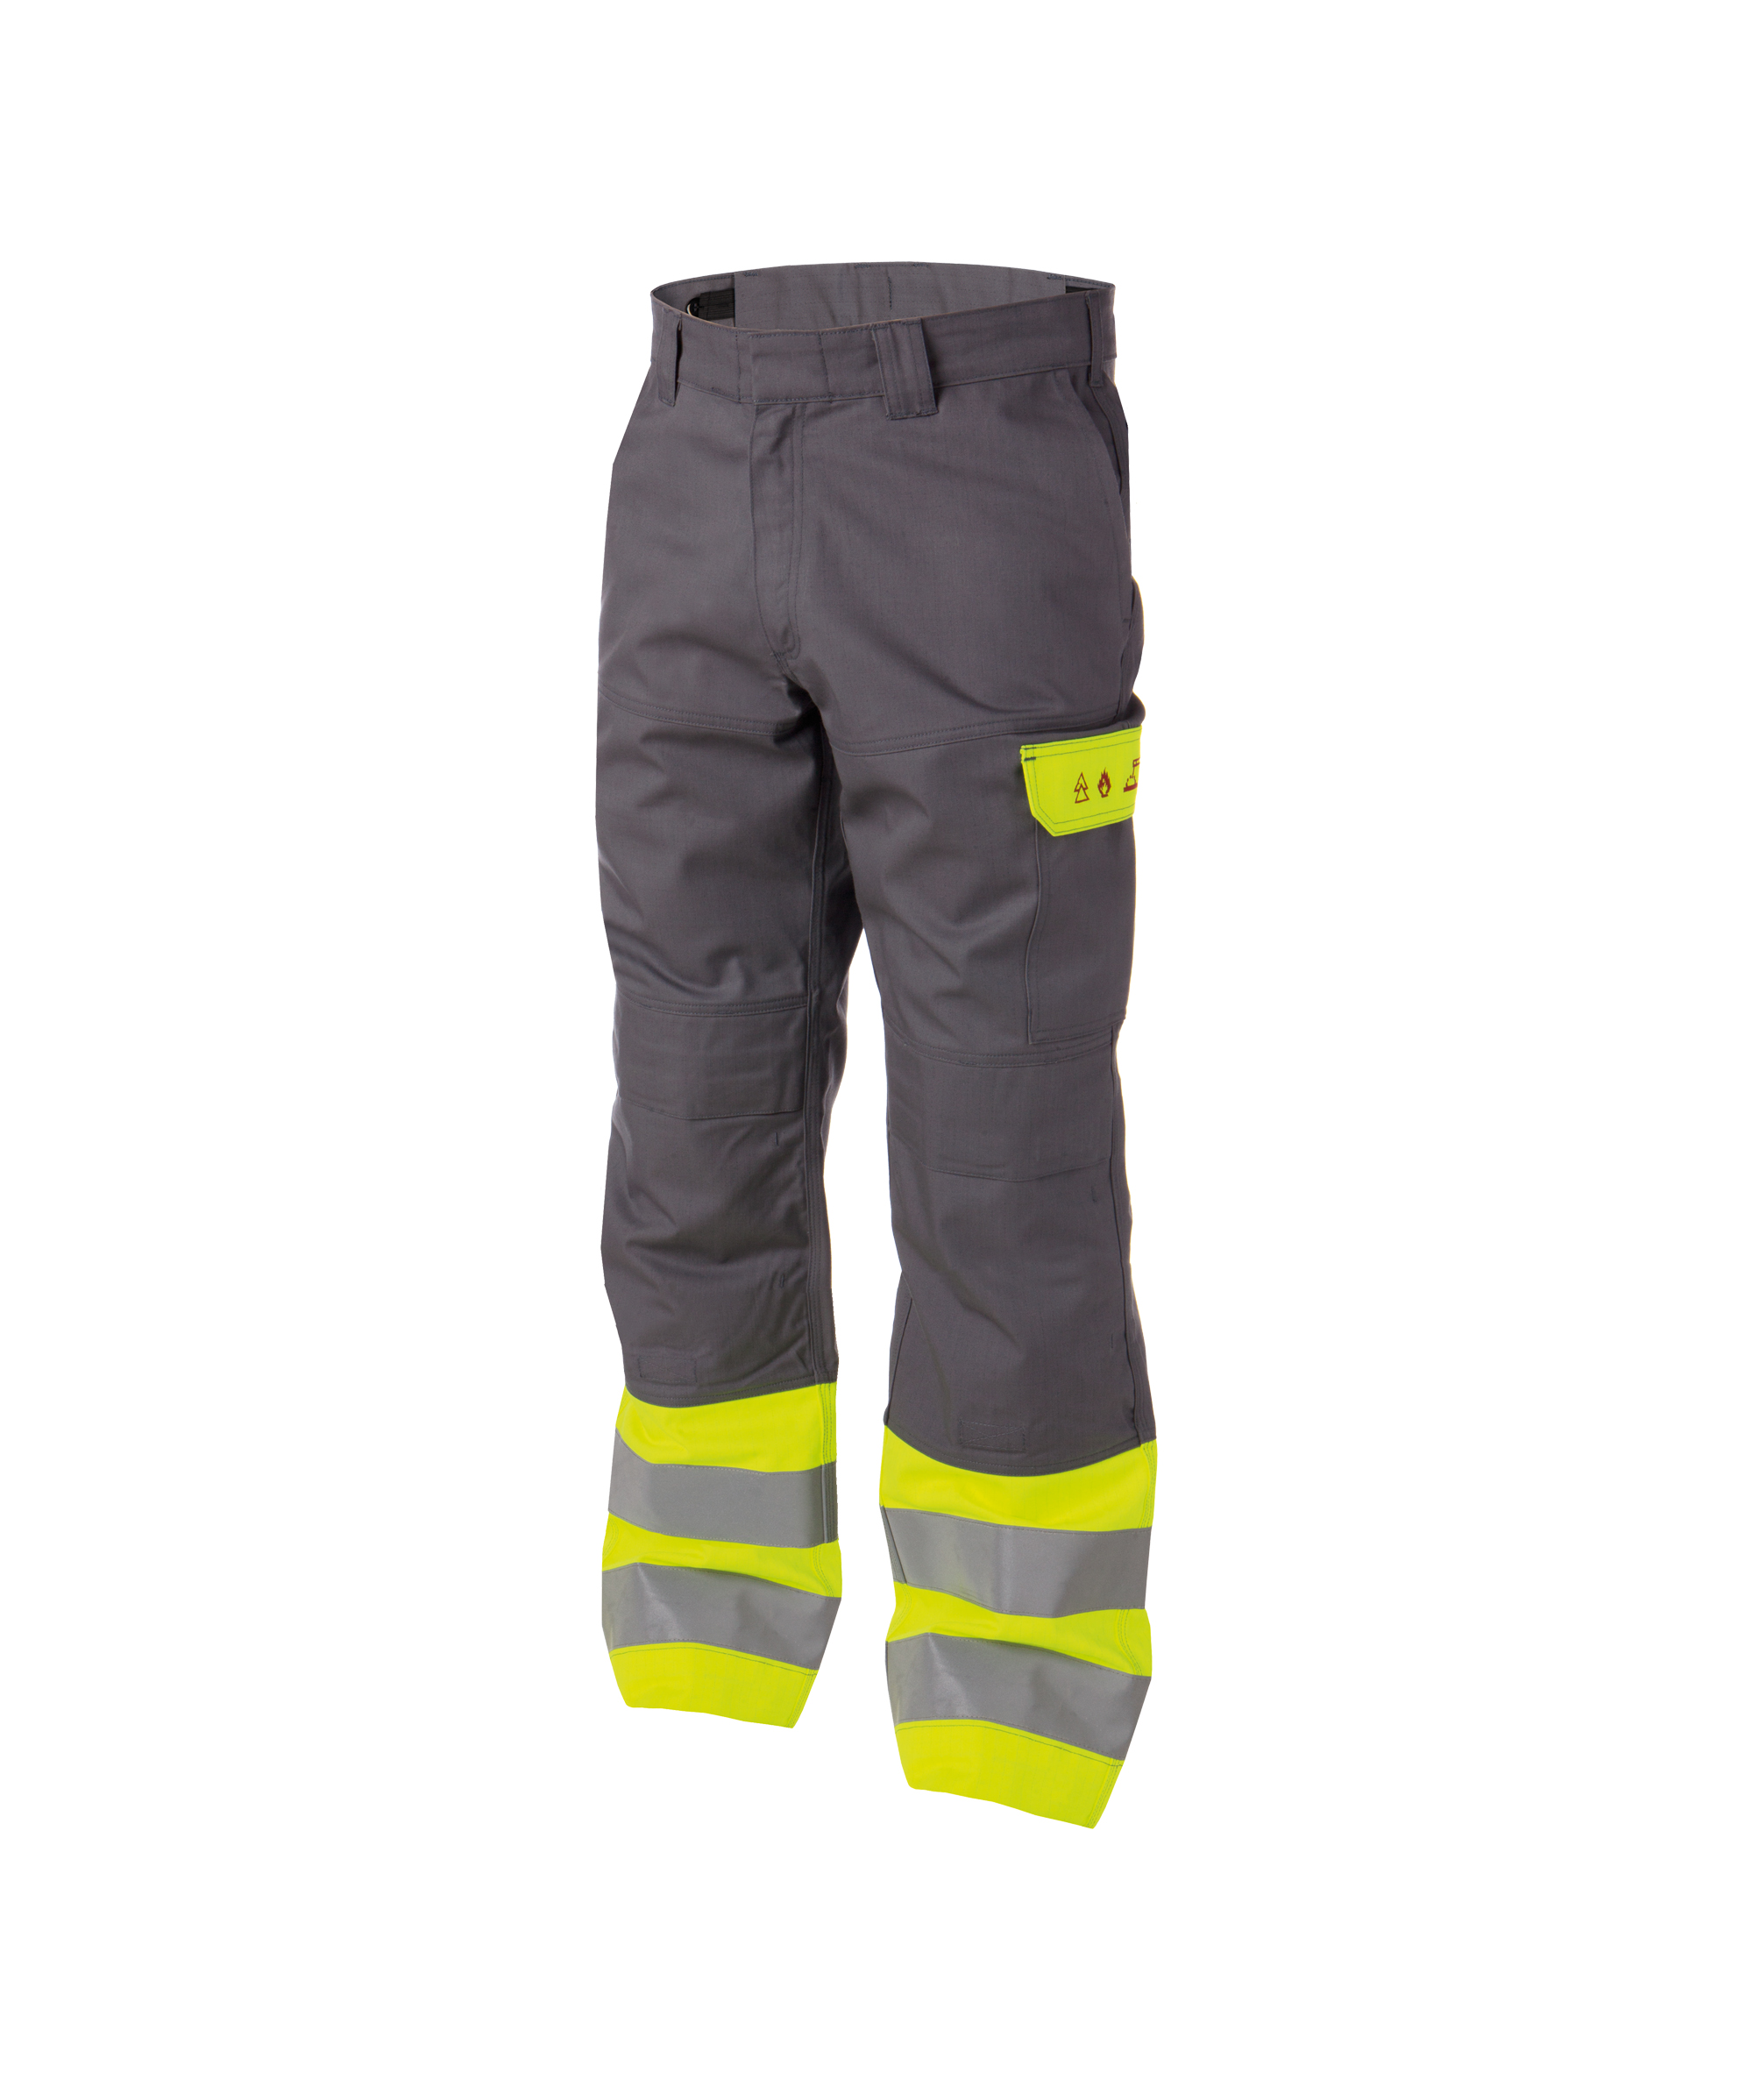 lenox_two-tone-multinorm-high-visibilty-work-trousers-with-knee-pockets_graphite-grey-fluo-yellow_side.jpg